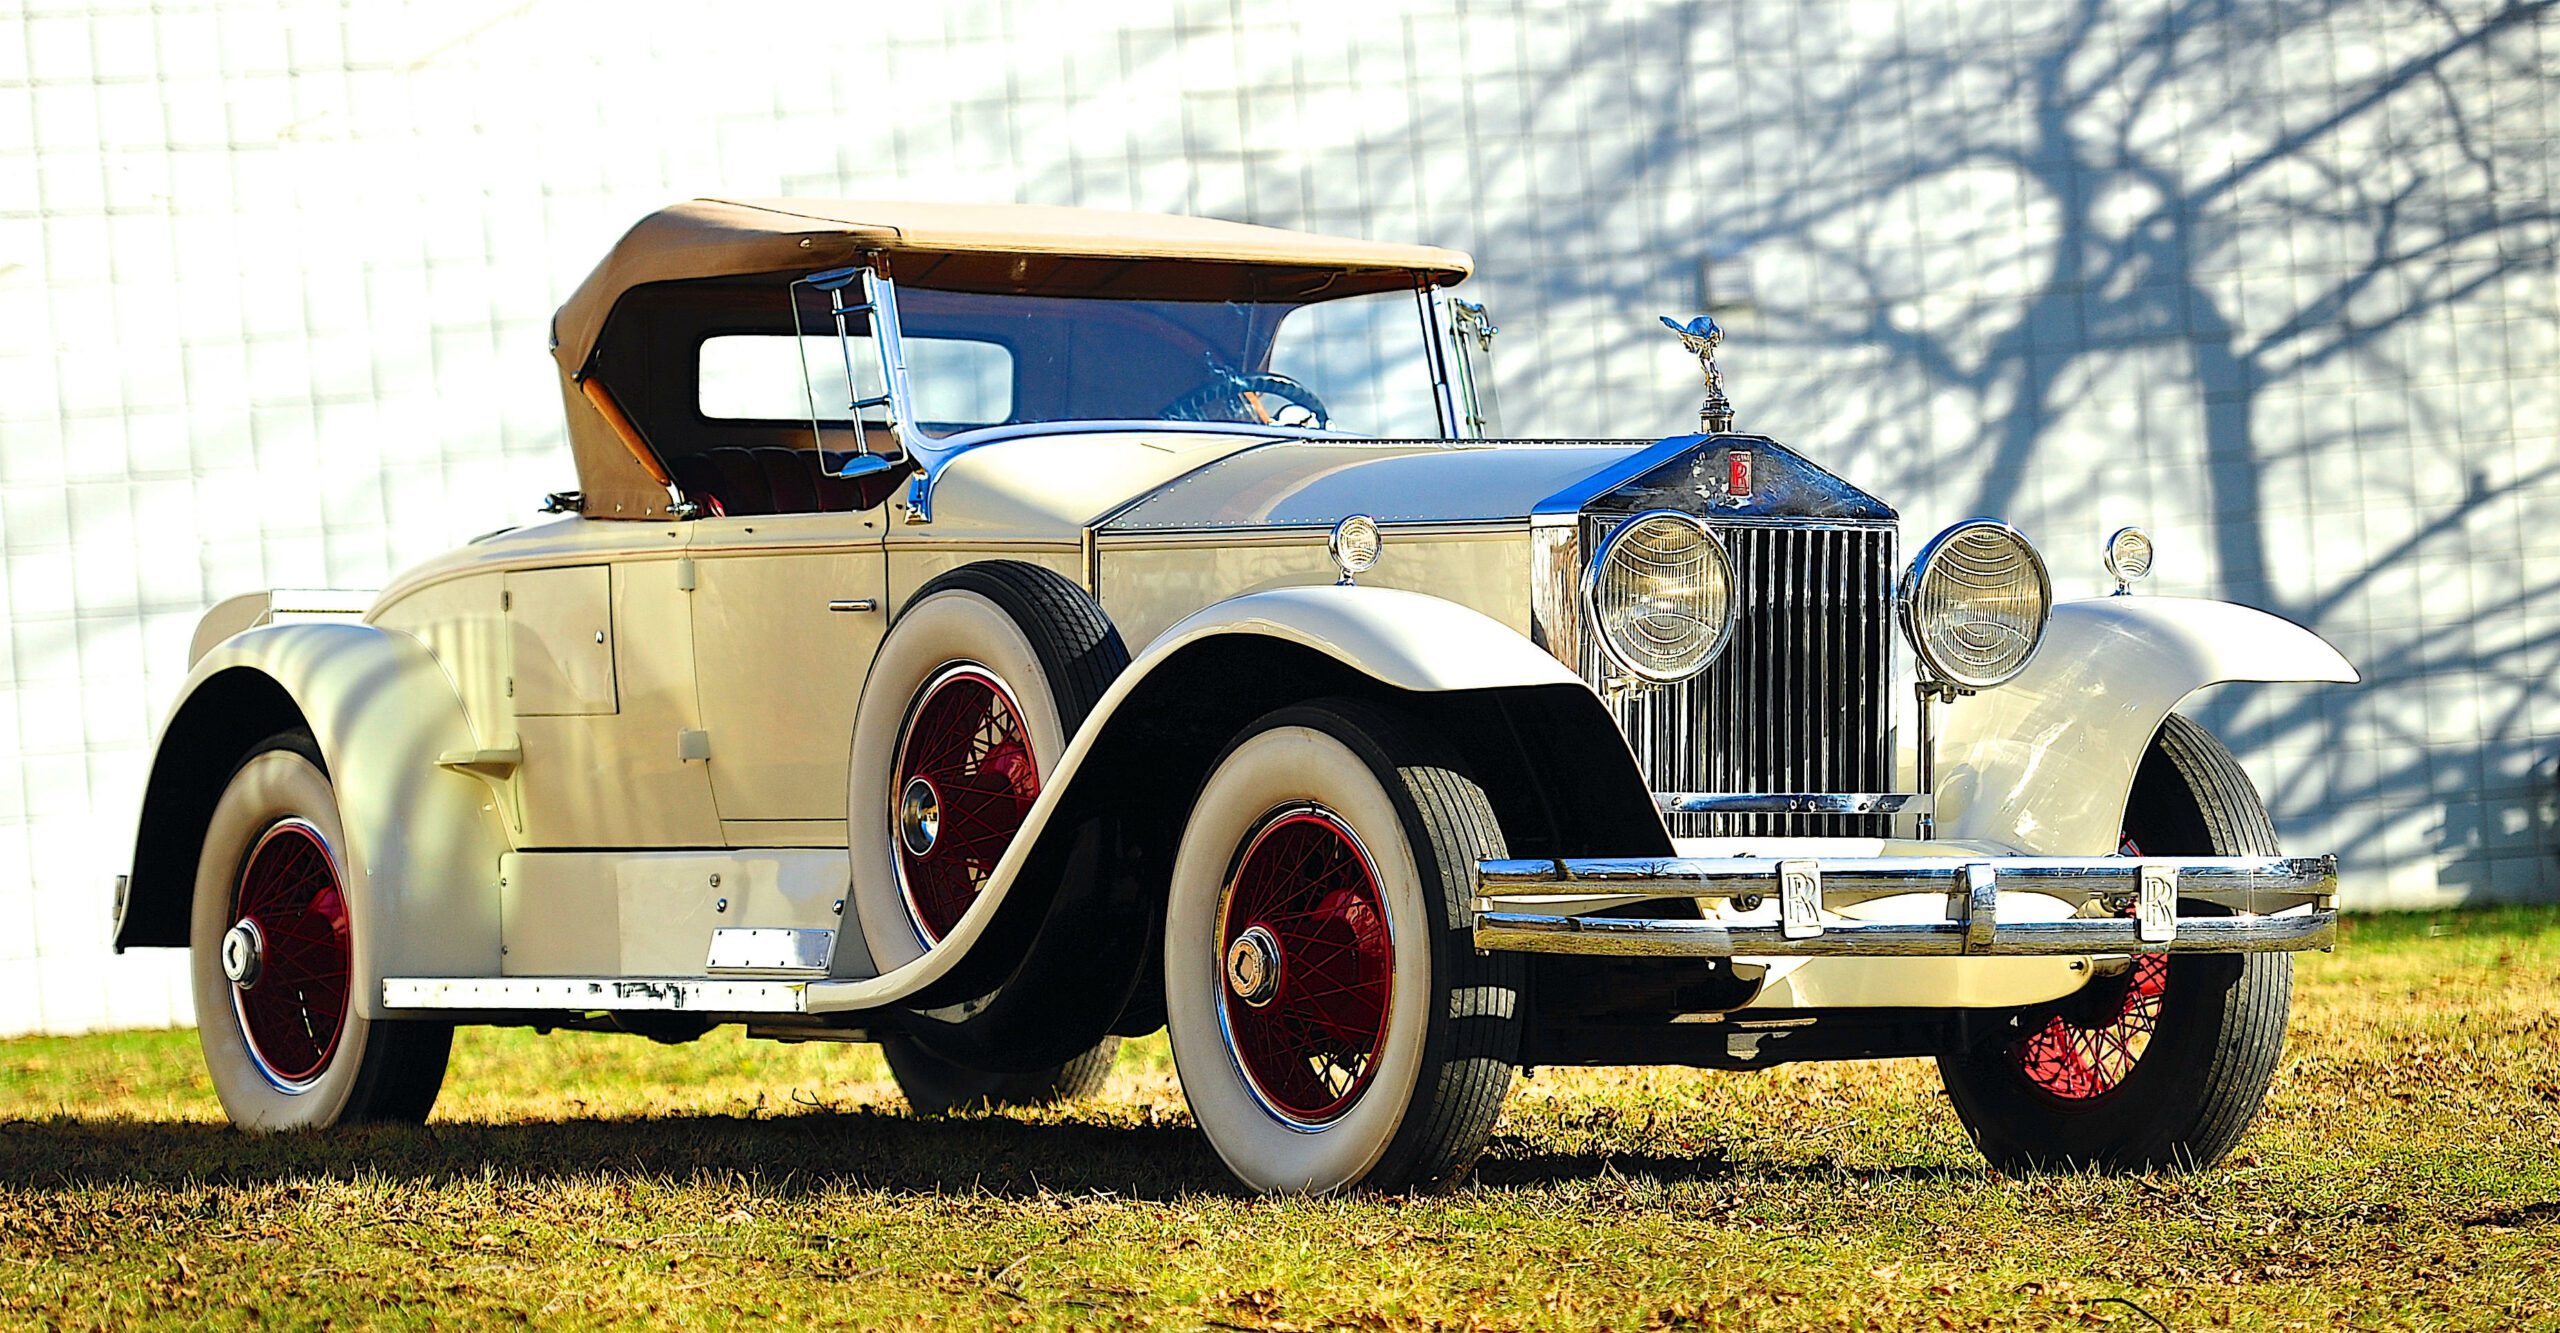 1925 Rolls-Royce Silver Ghost Piccadilly Roadster, Rolls Royce, Rolls-Royce Silver Ghost